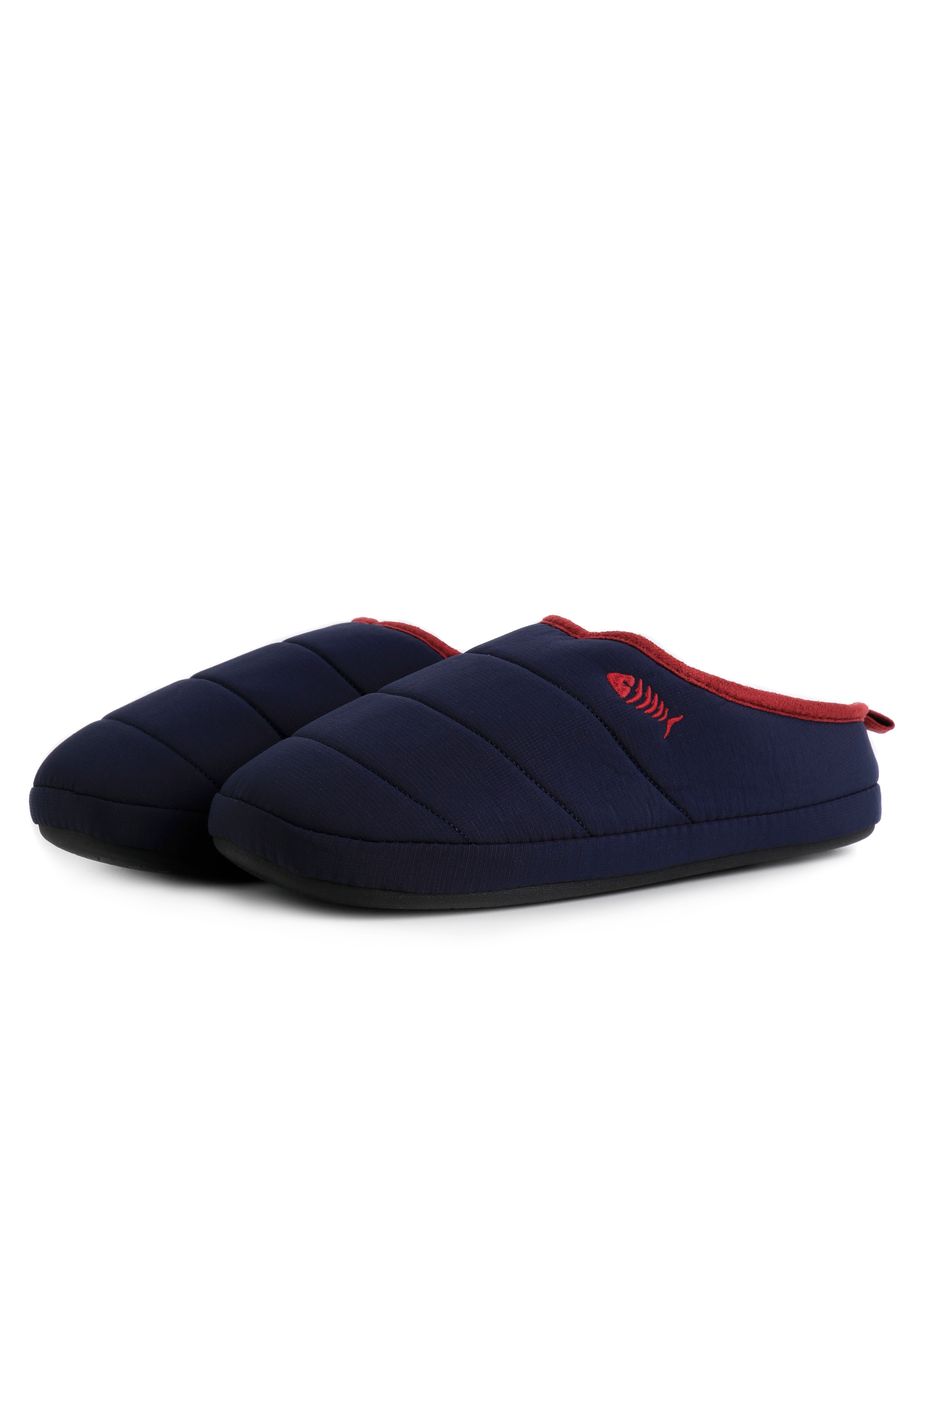 Burlington Quilted Slippers Midnight